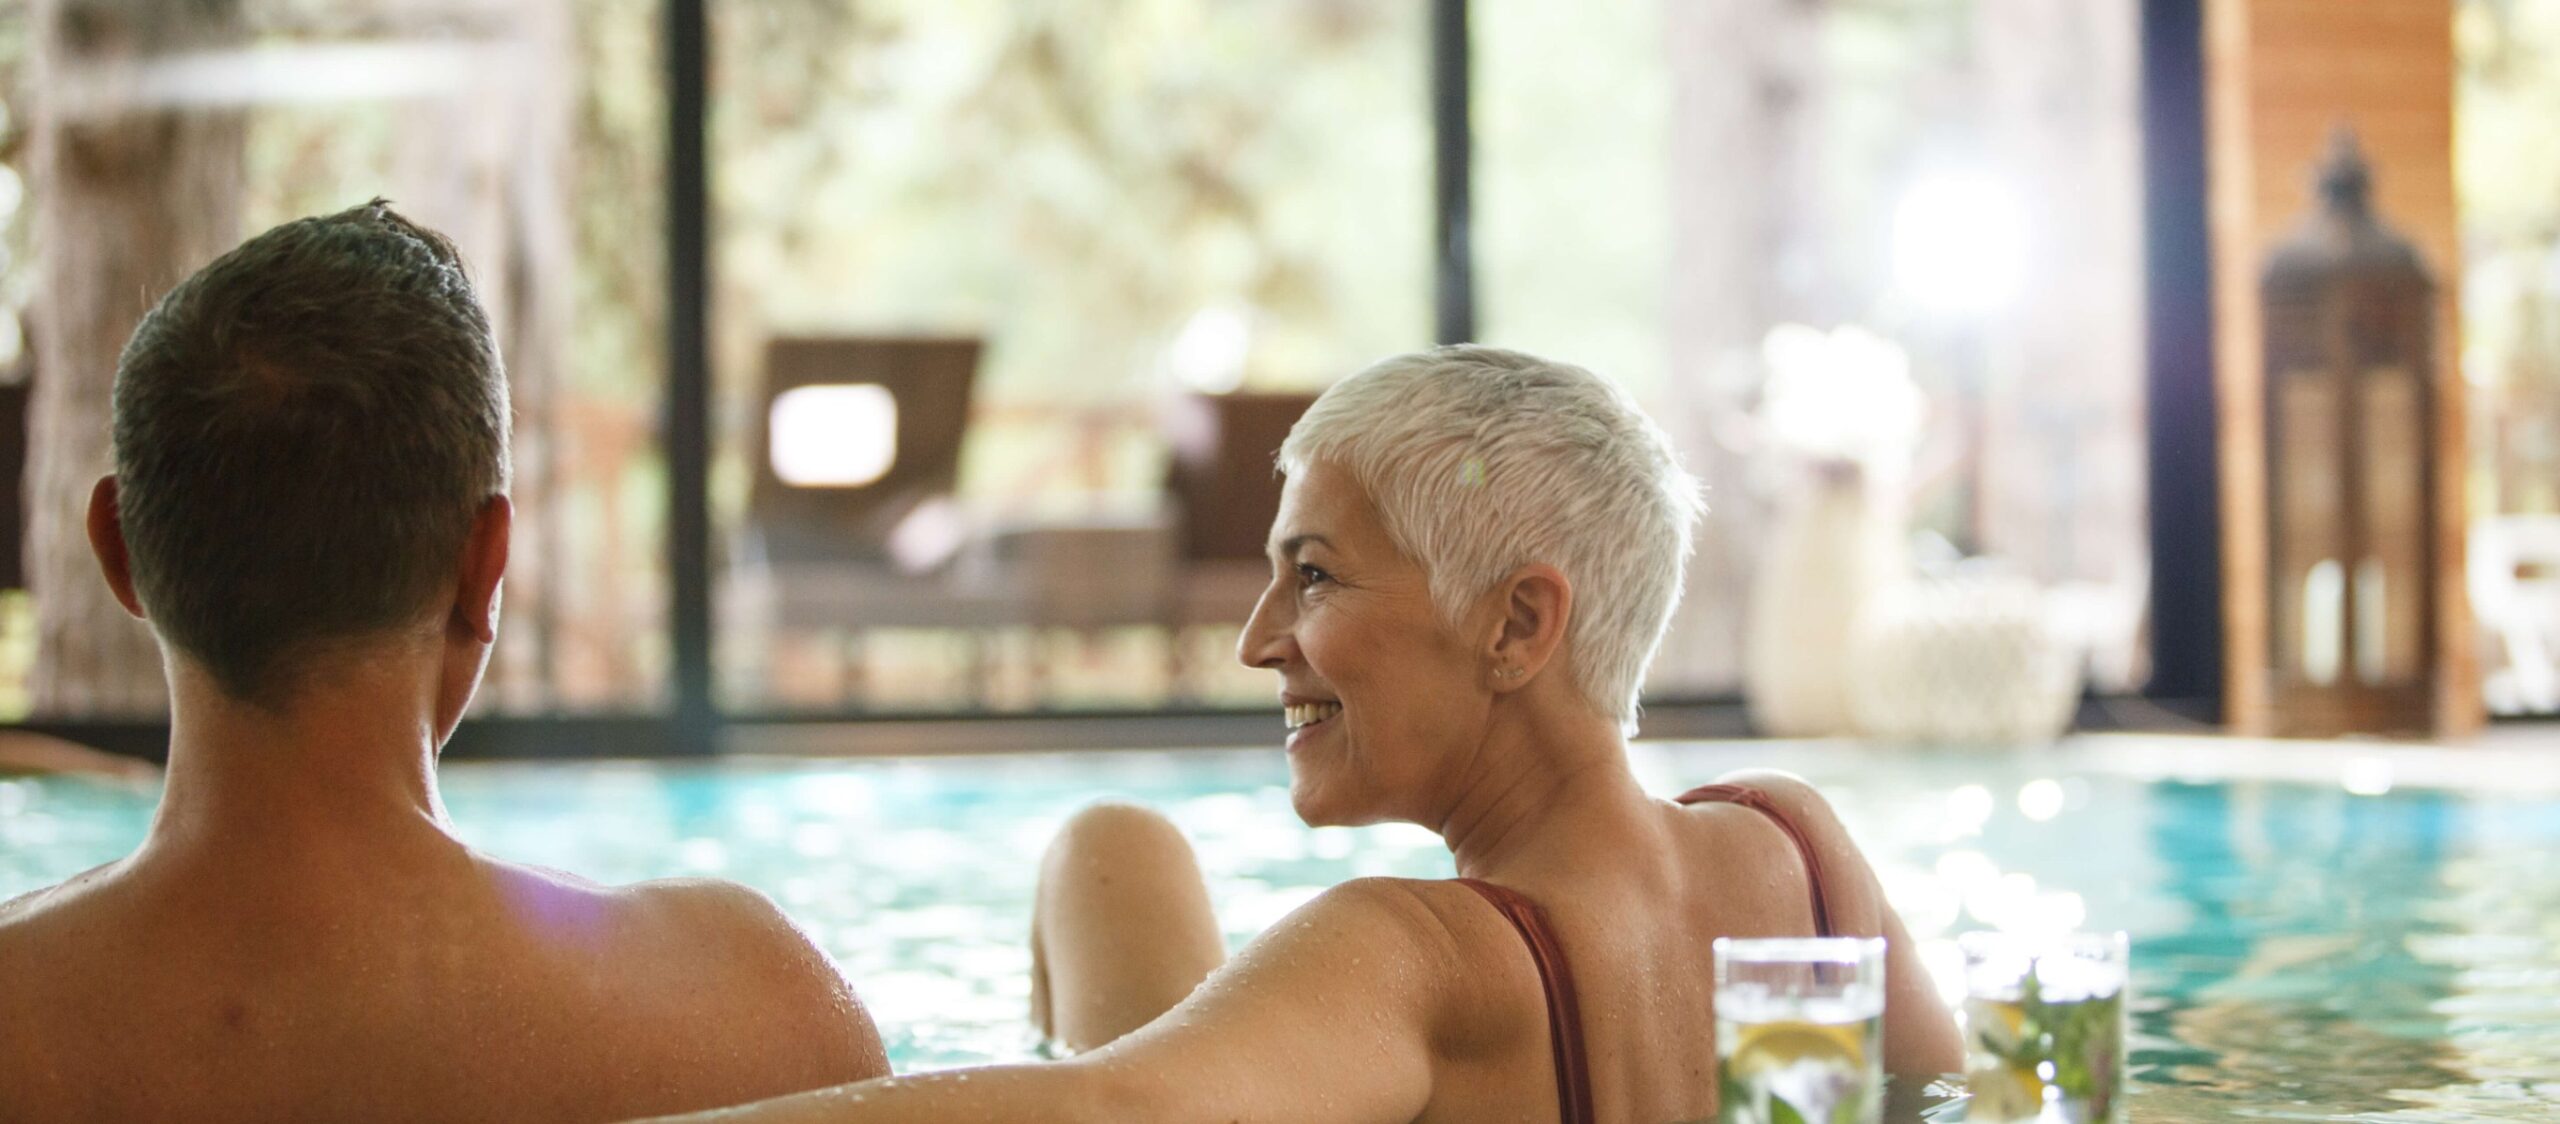 A couple in their 55+ years enjoying independent living by relaxing in a swimming pool at a retirement community.